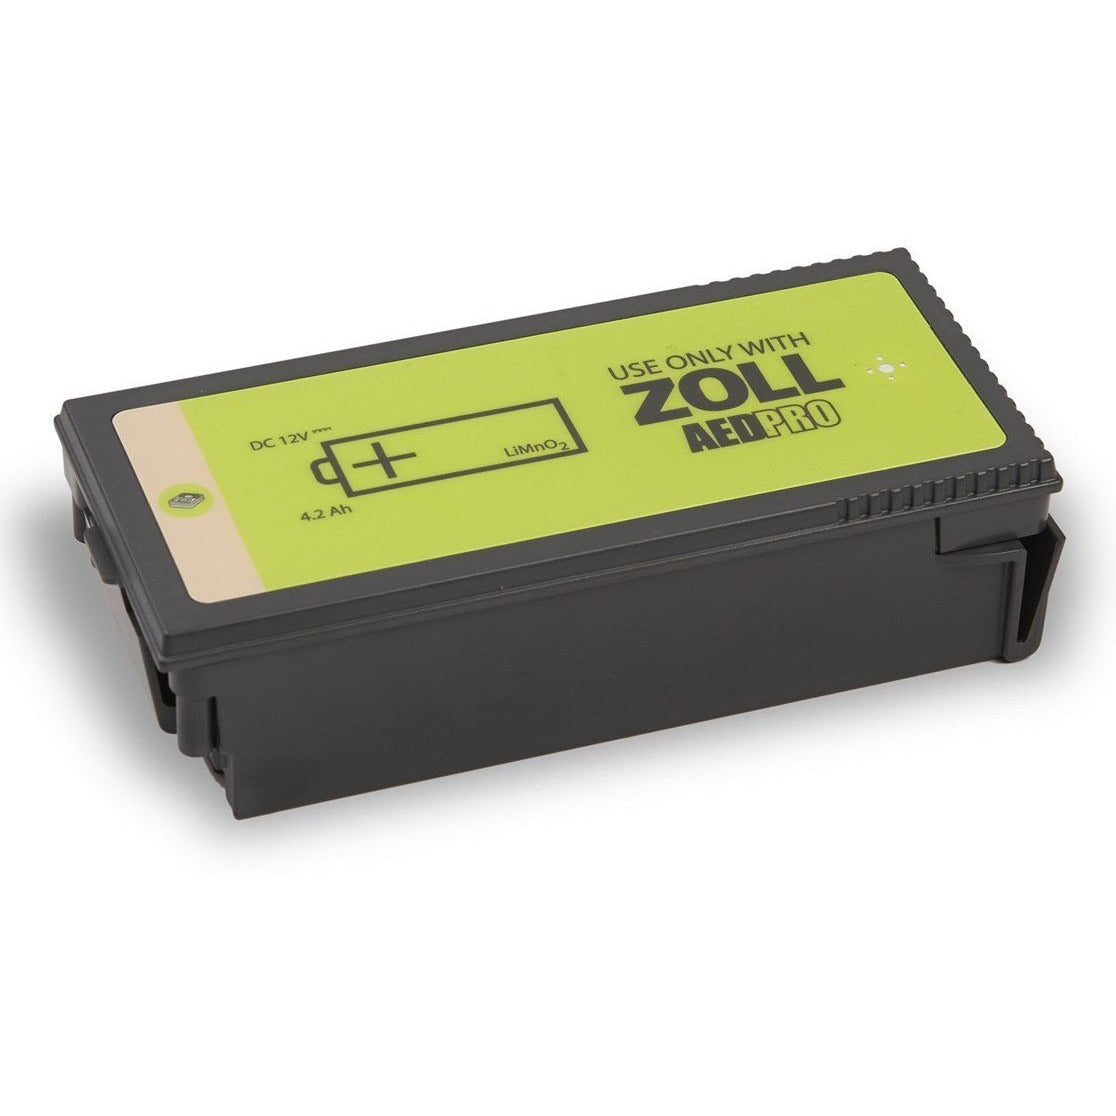 Zoll AED Pro Battery